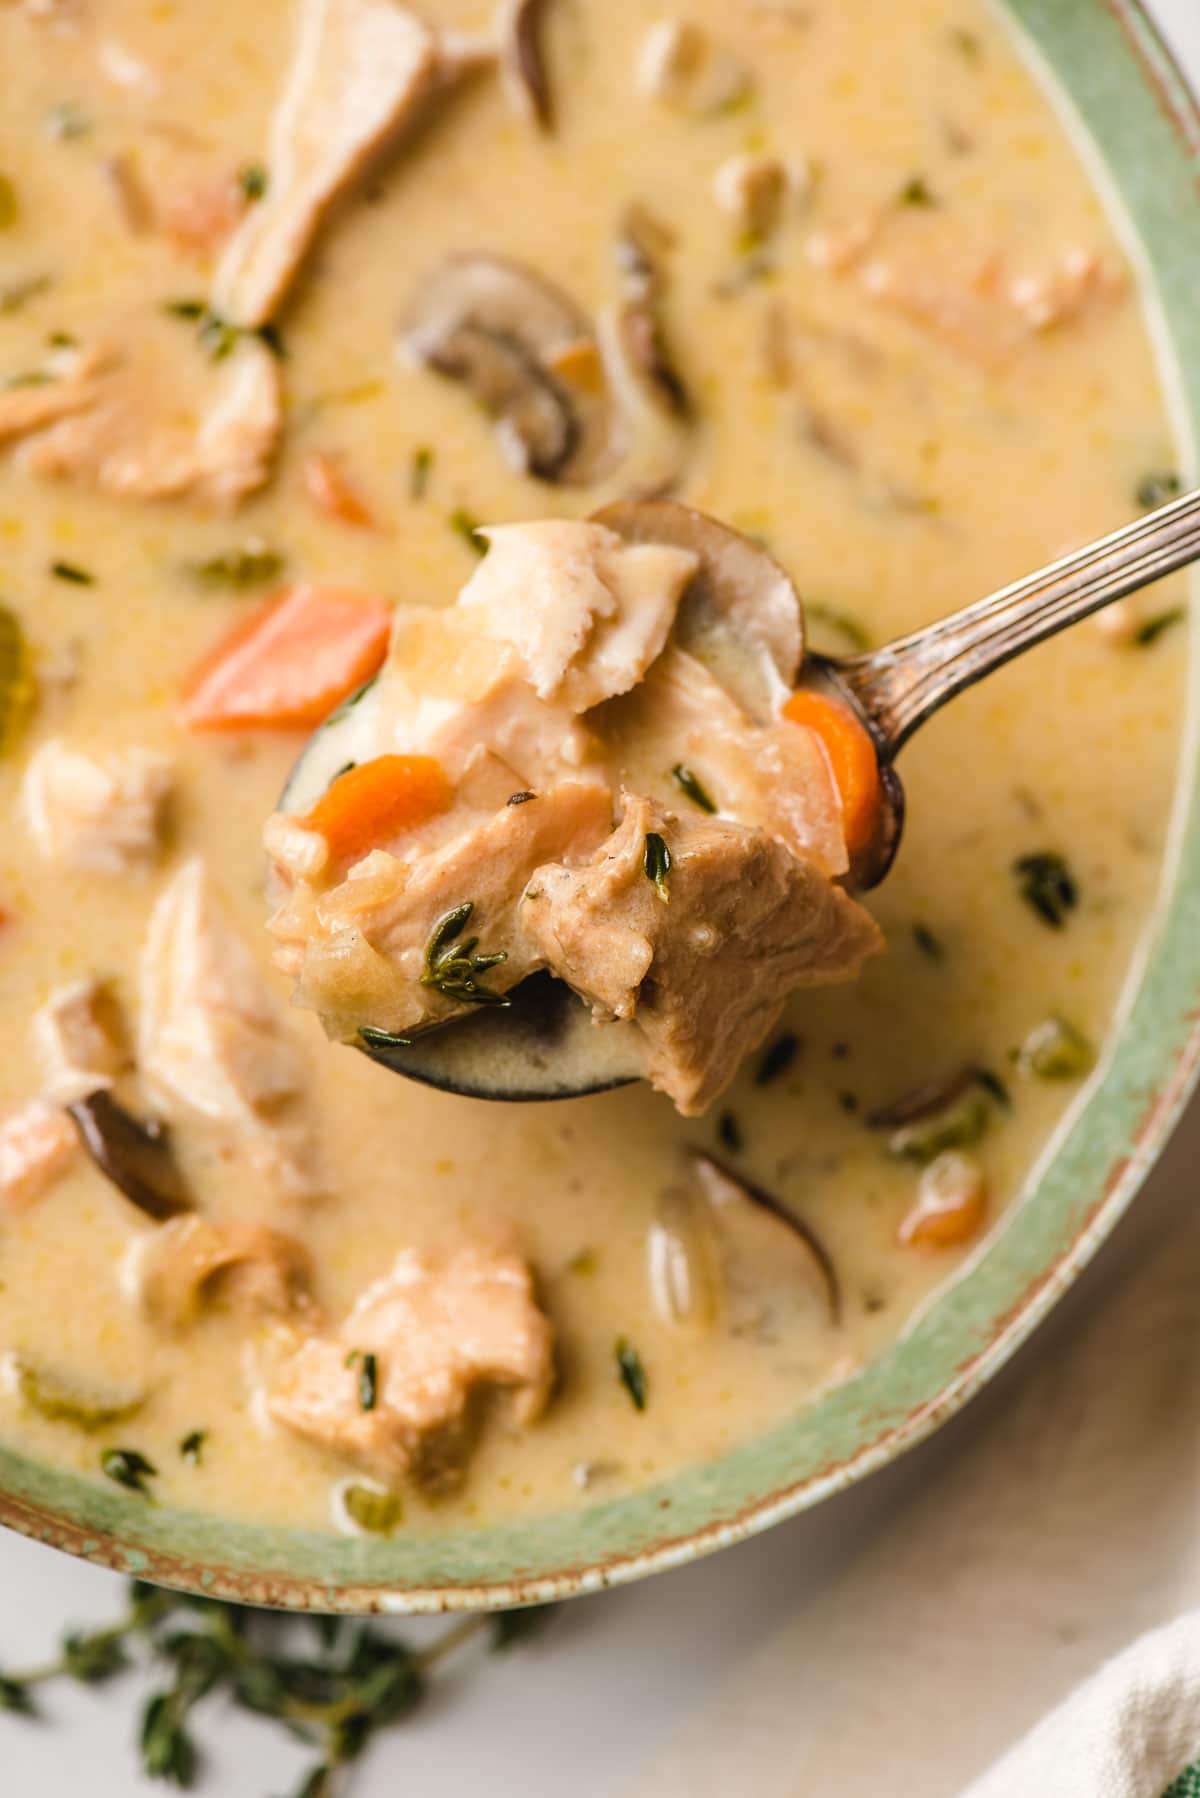 Spoonful of Creamy Turkey Soup with carrots and thyme leaves.